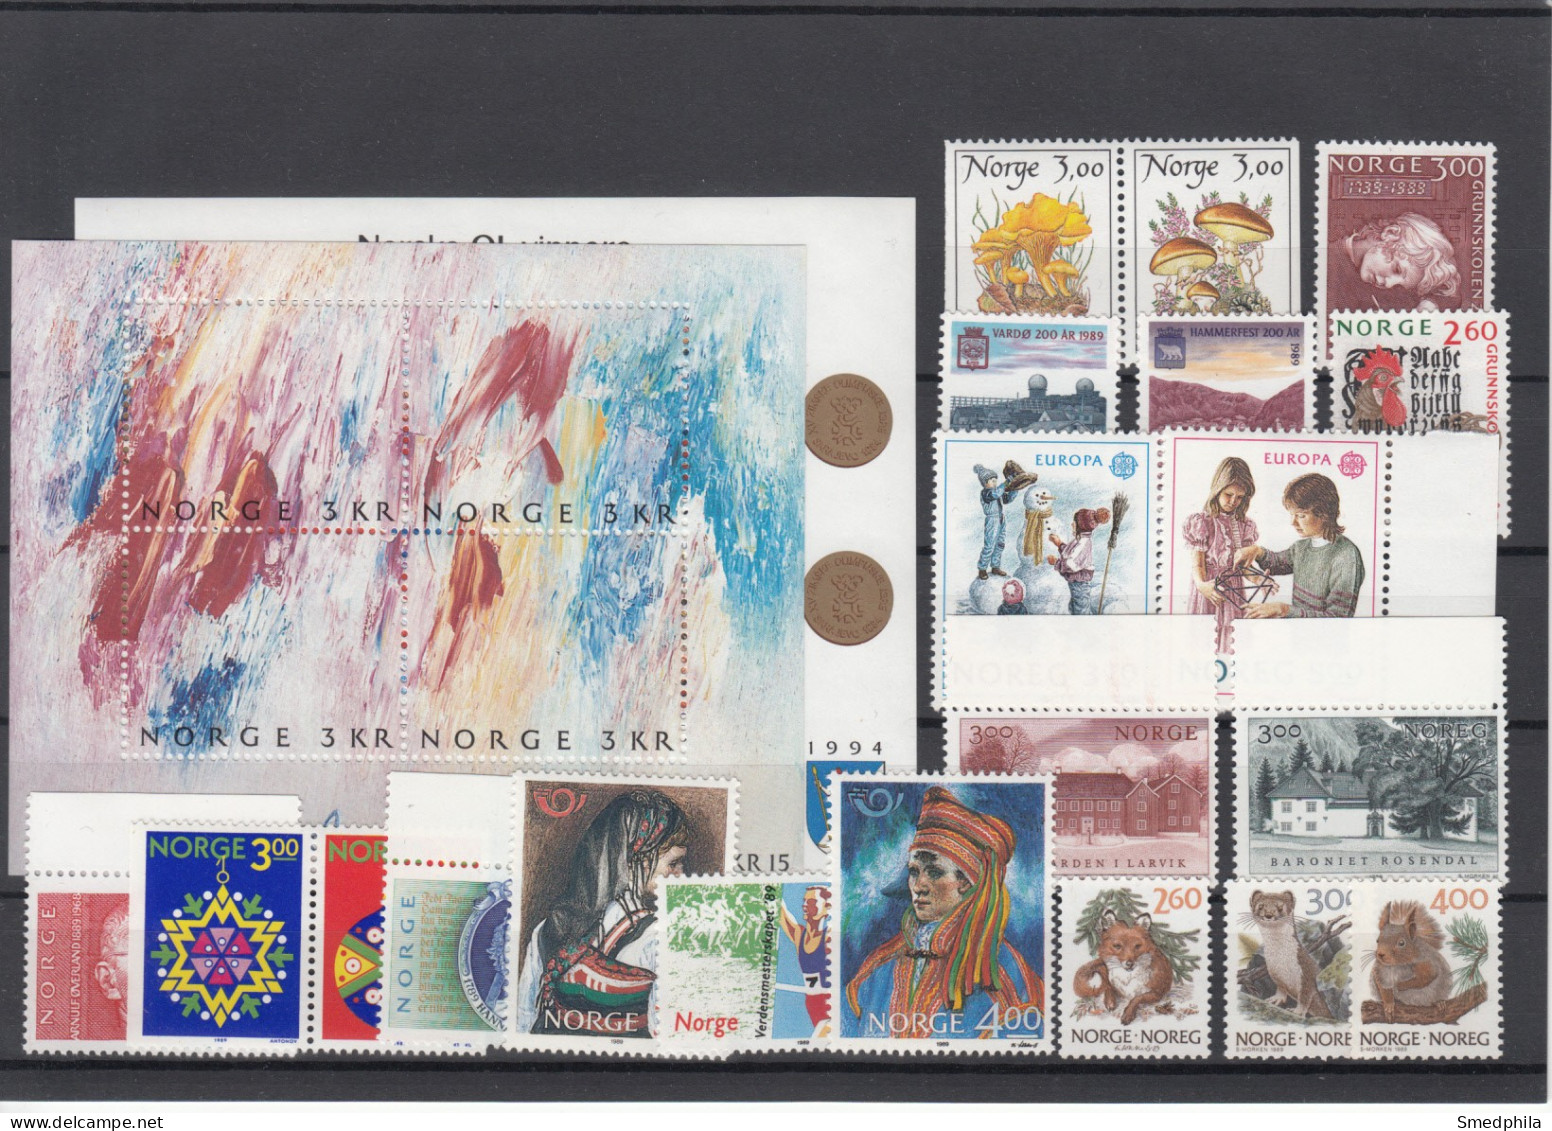 Norway 1989 - Full Year MNH ** - Años Completos